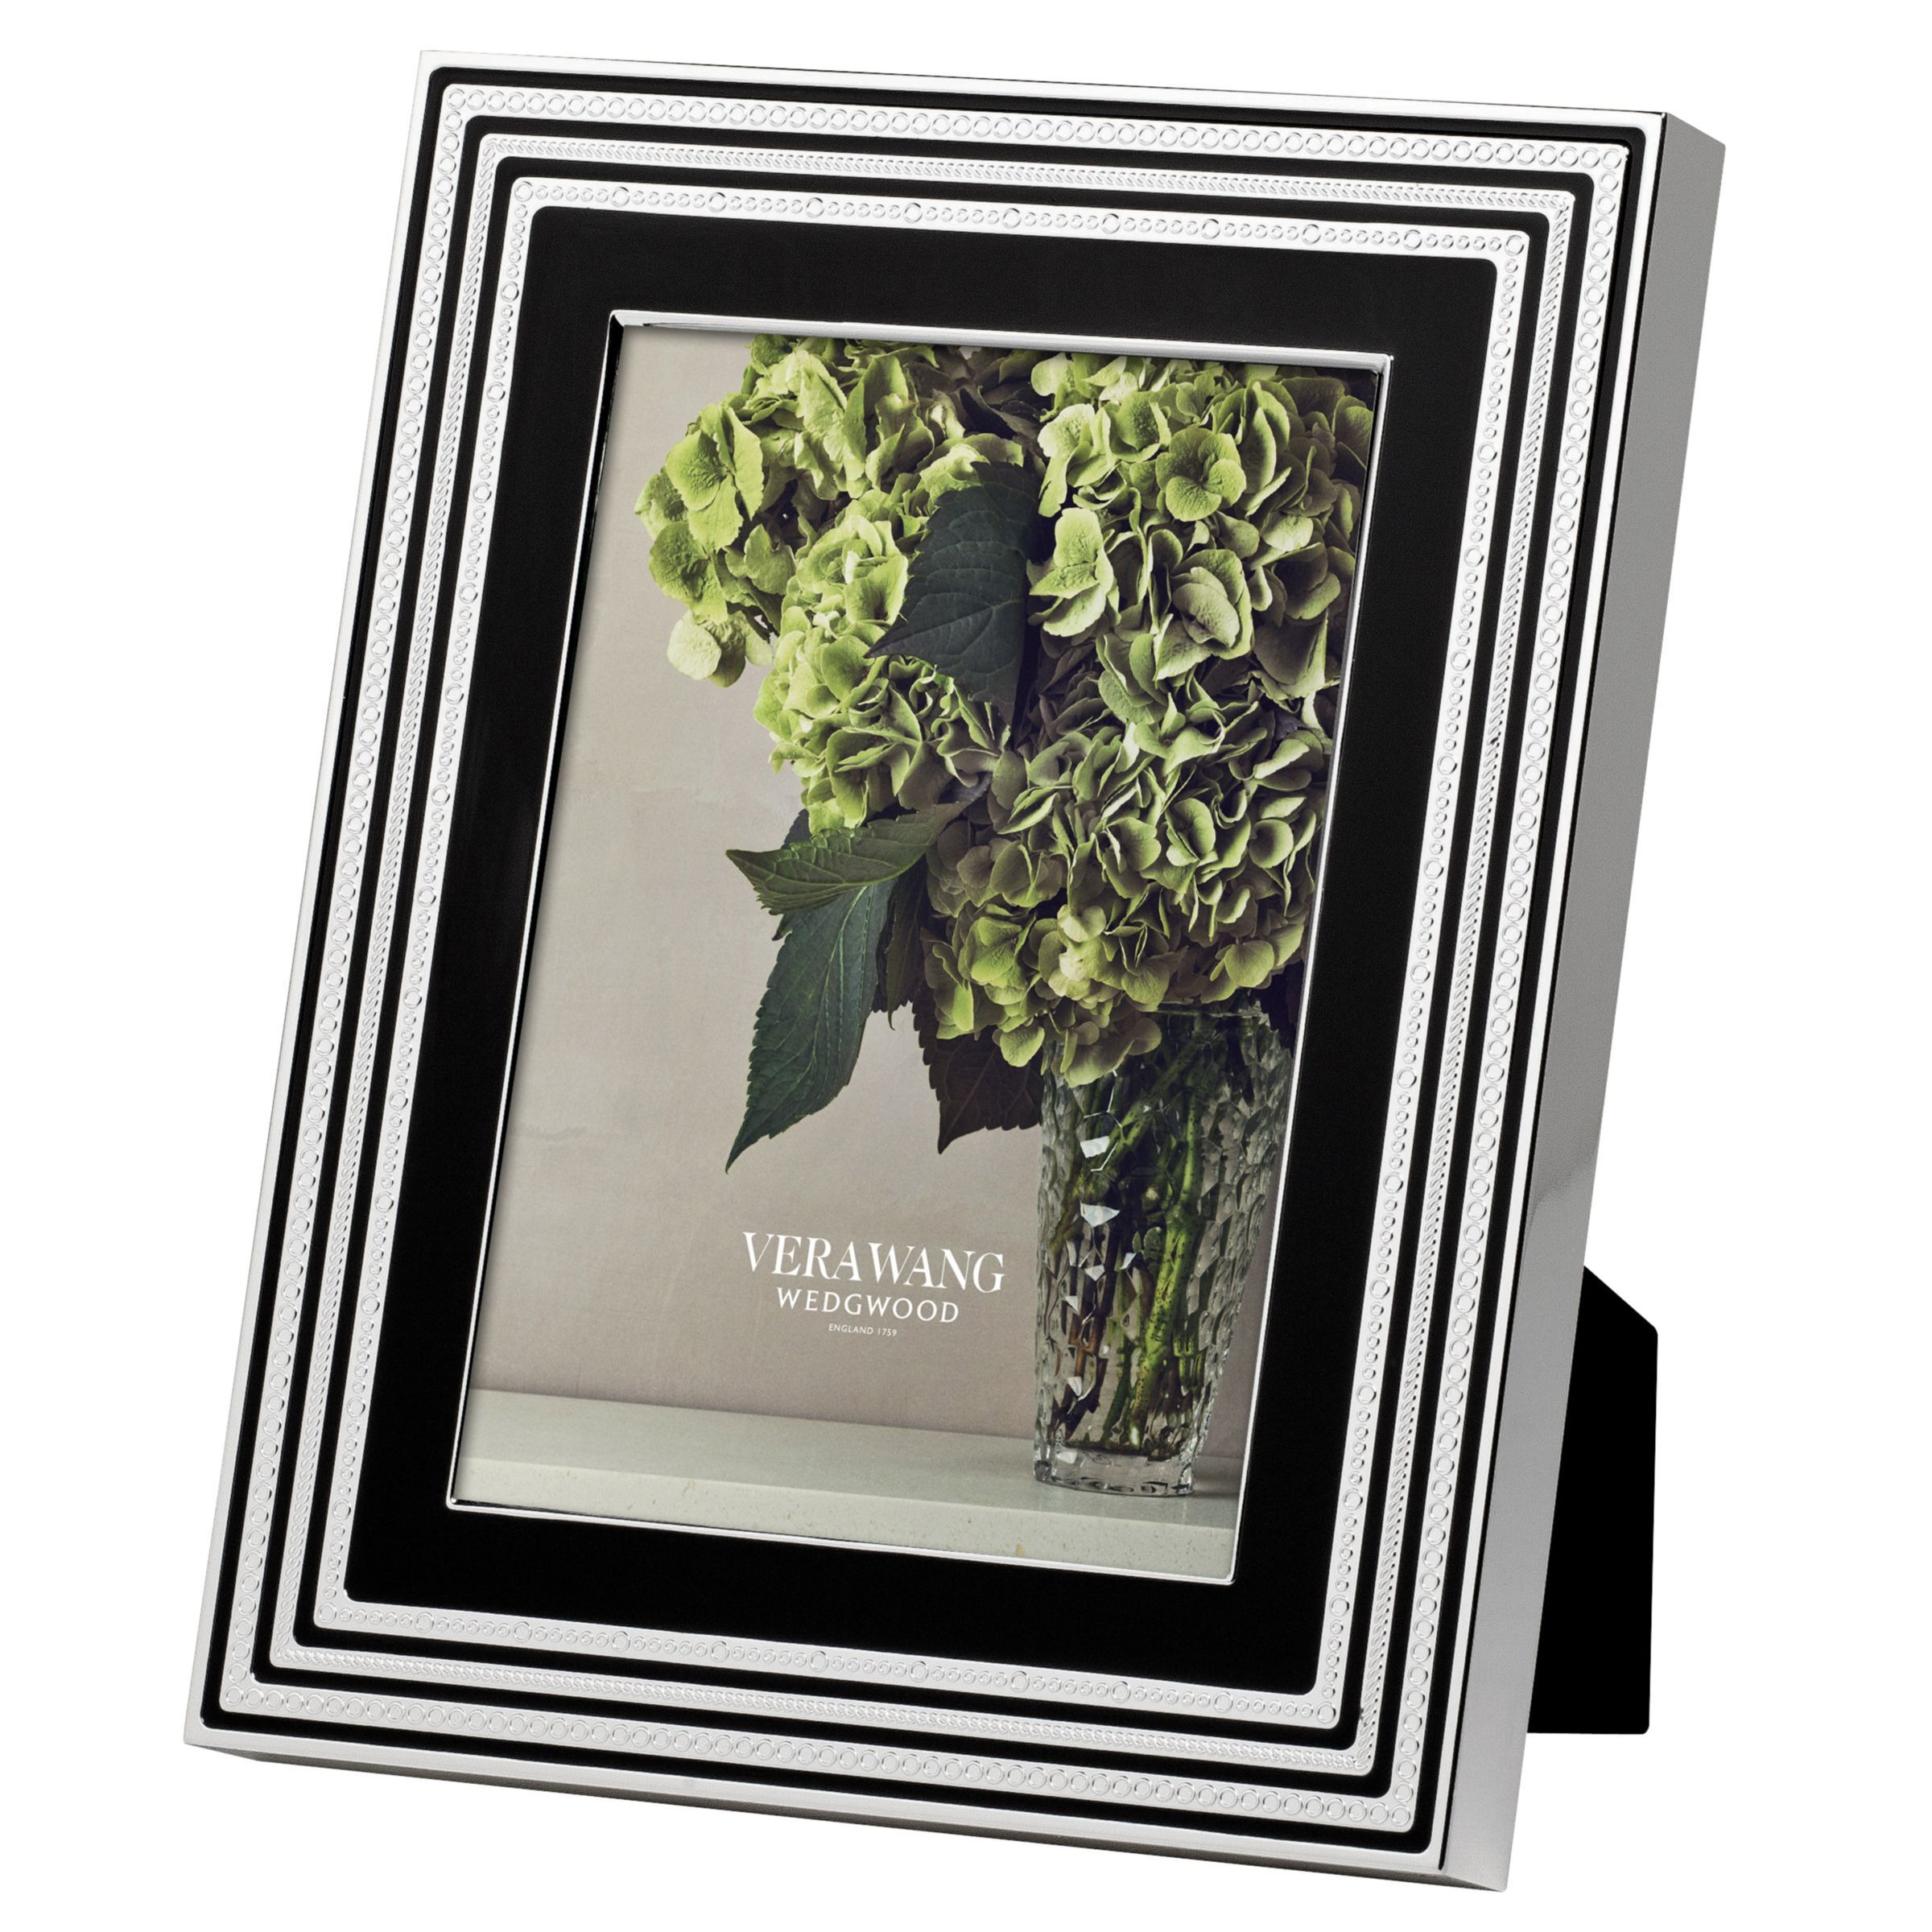 Vera Wang With Love Photo Frame, Noir, Silver - image 1